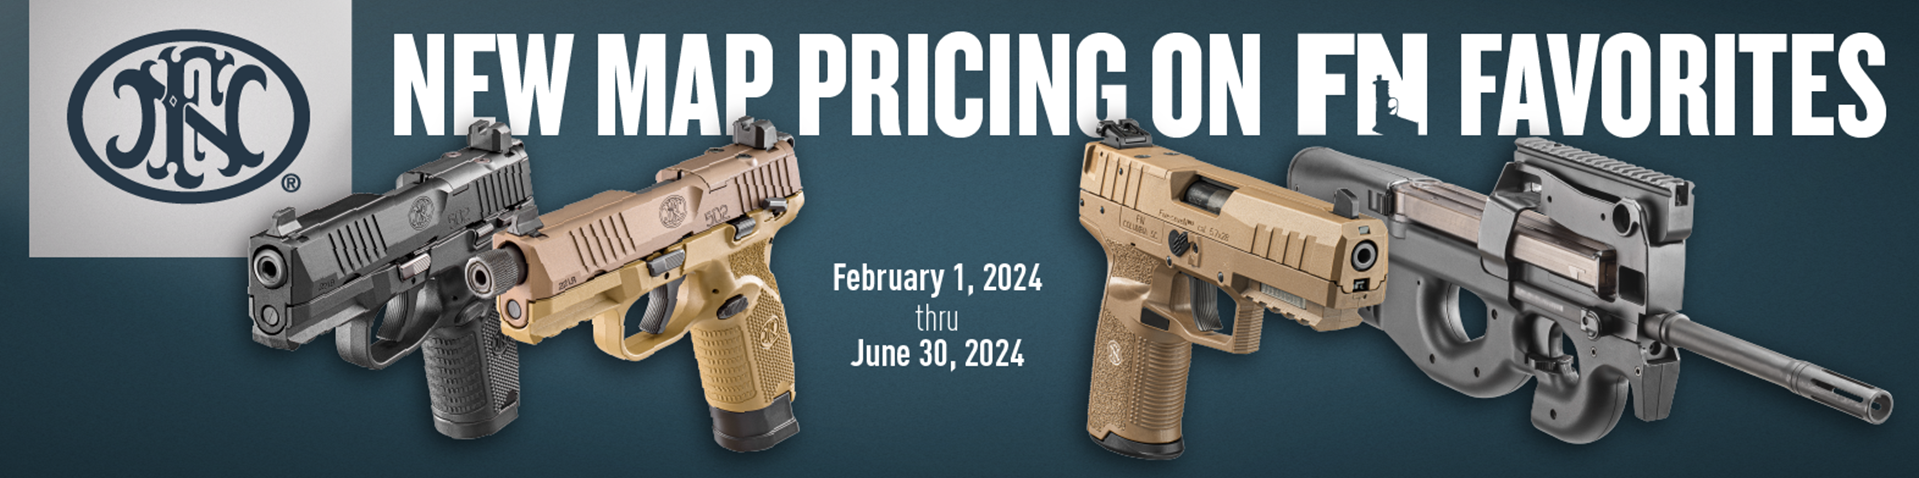 FN New Pricing